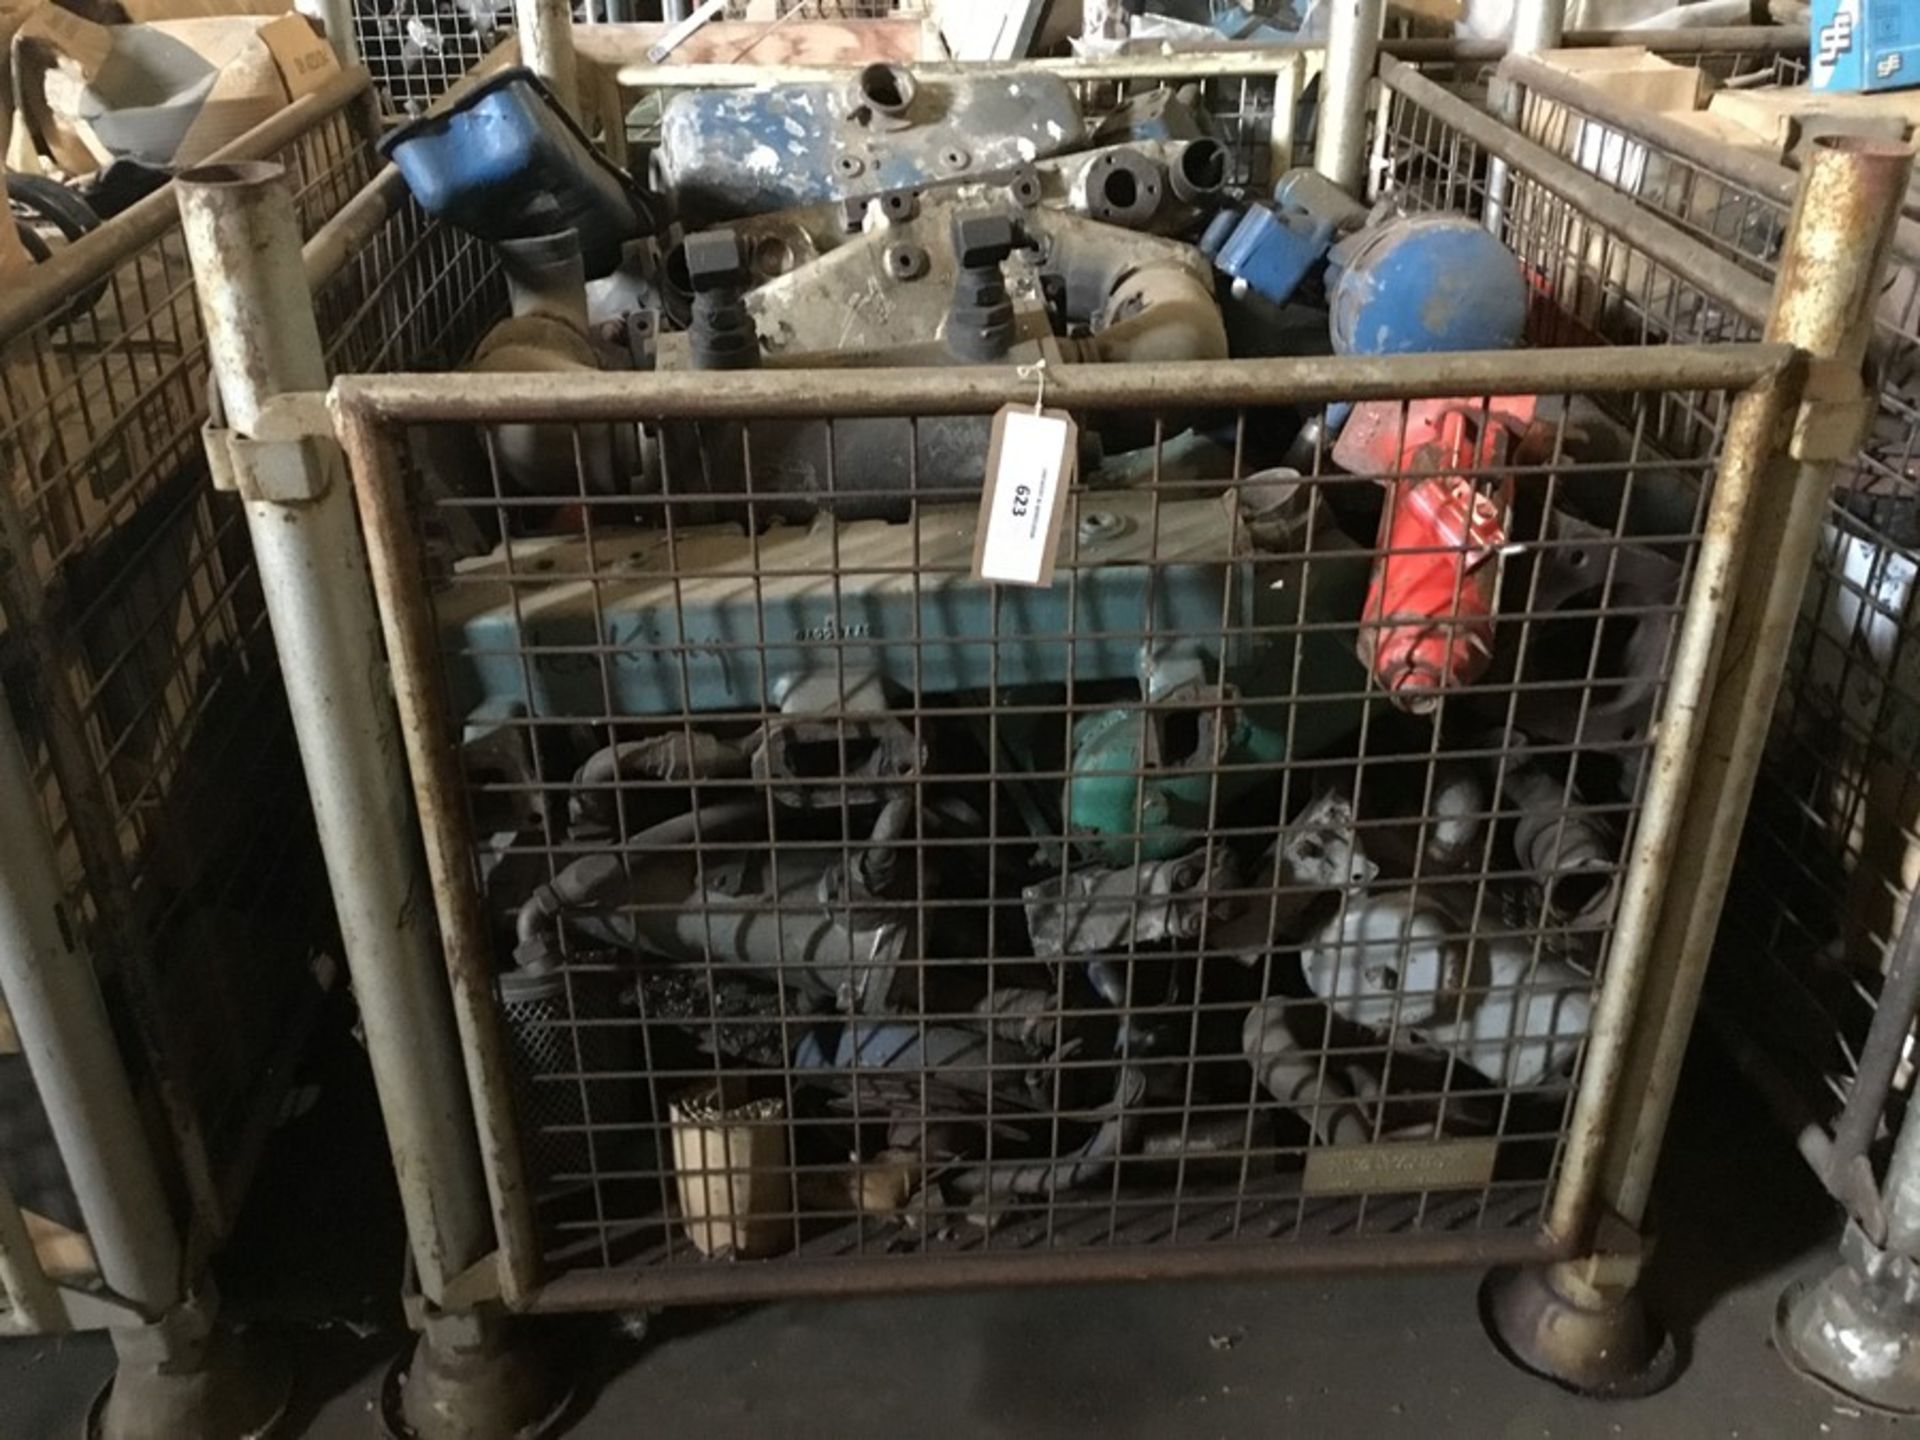 Cage containing misc. marine header tanks, manifold coolers etc